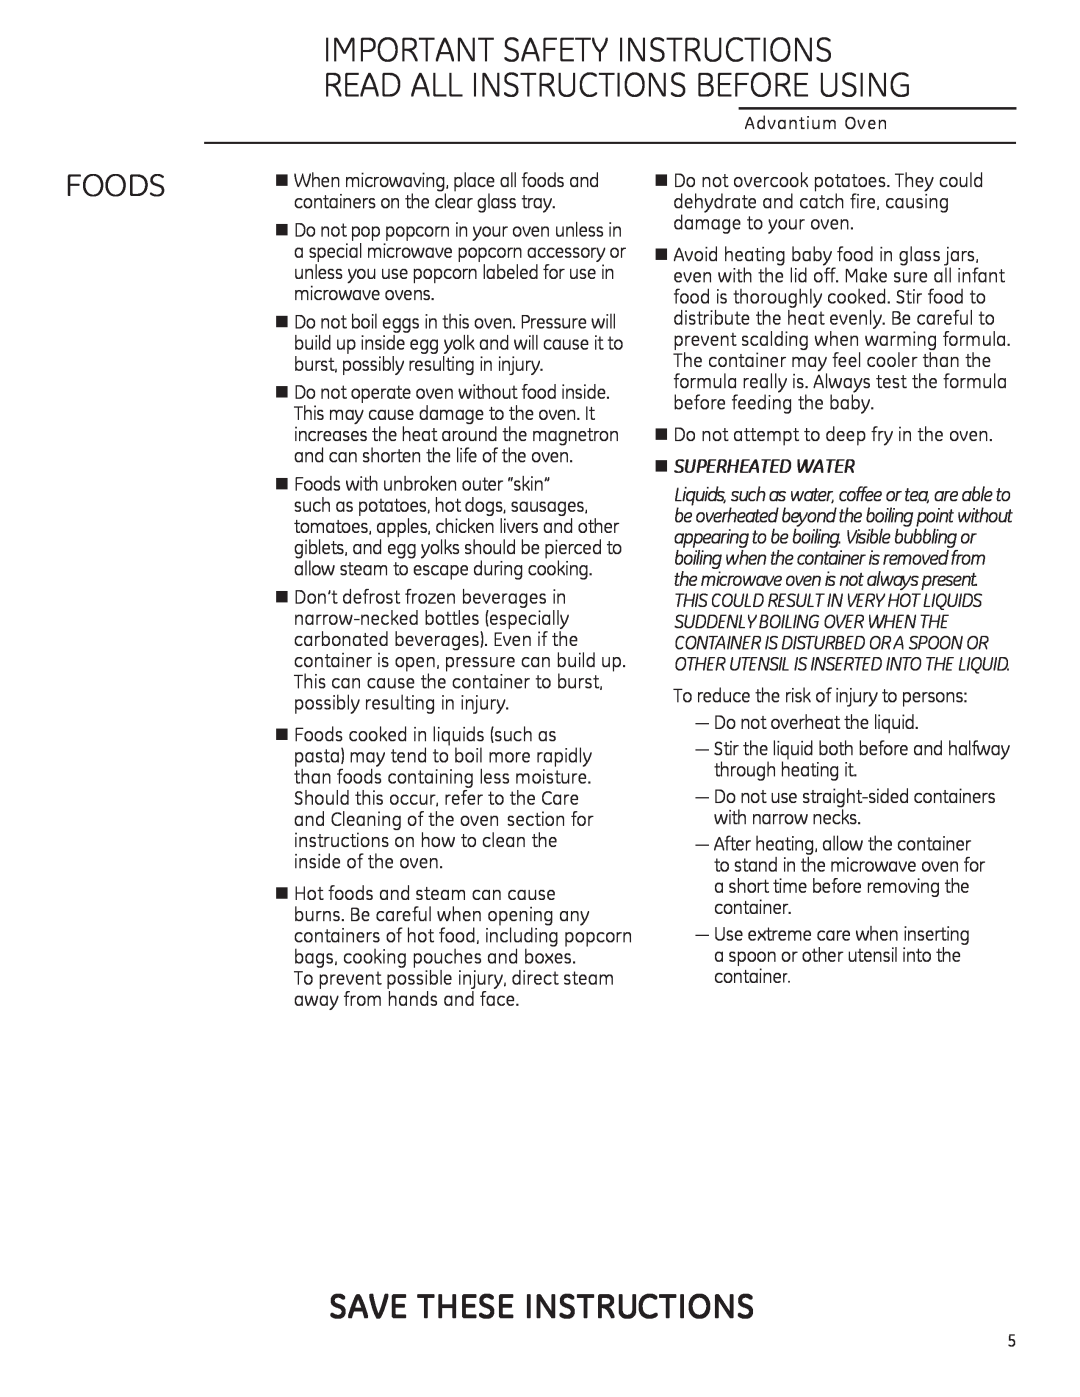 GE CSA1201, PSA1200, PSA1201 owner manual Foods, Save These Instructions, nSUPERHEATED WATER 